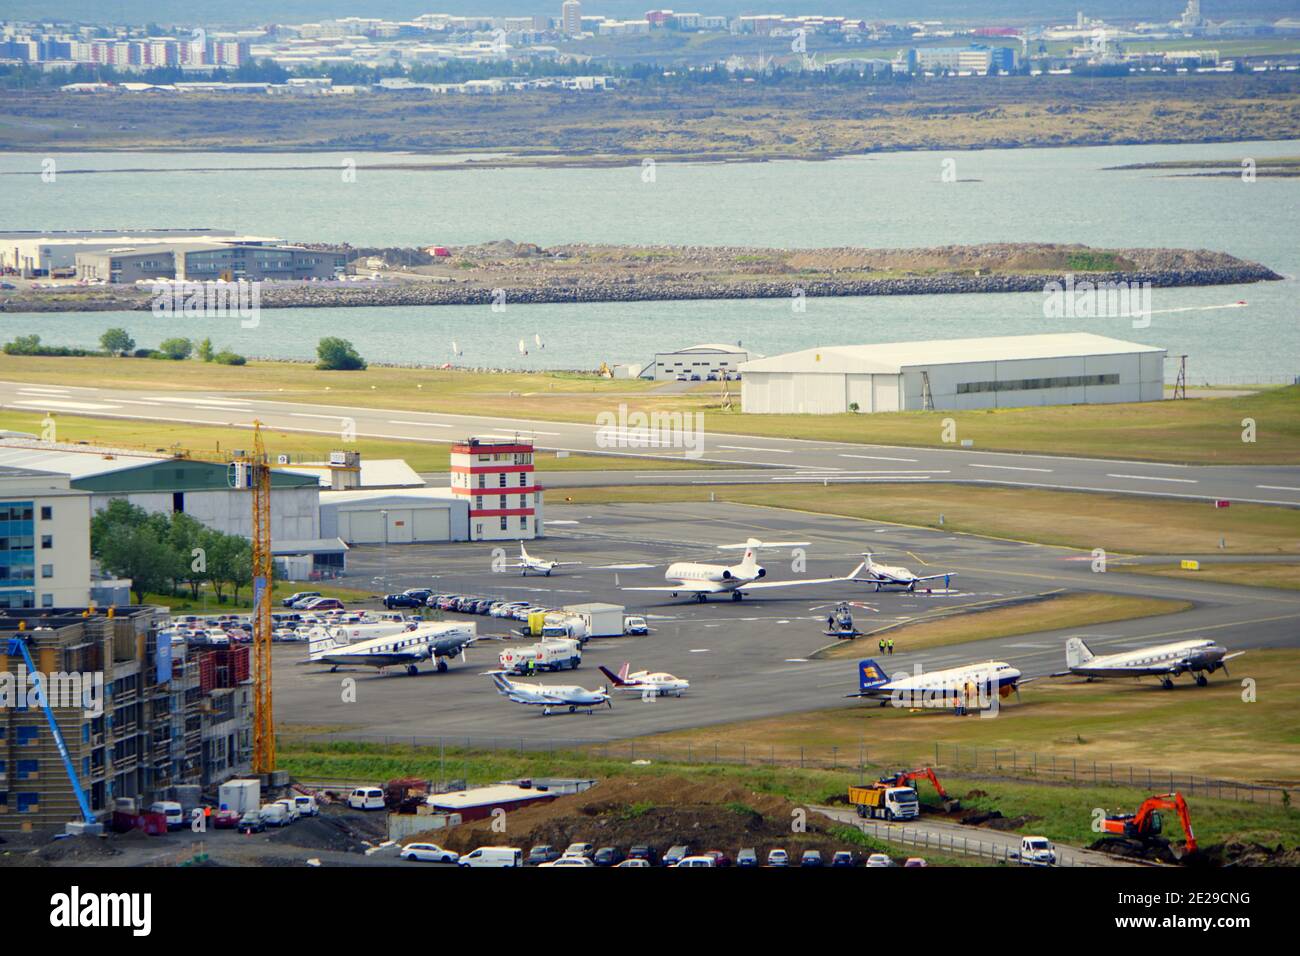 Reykjavik, Iceland - June 20, 2019 - The aerial view of the airport by the bay Stock Photo